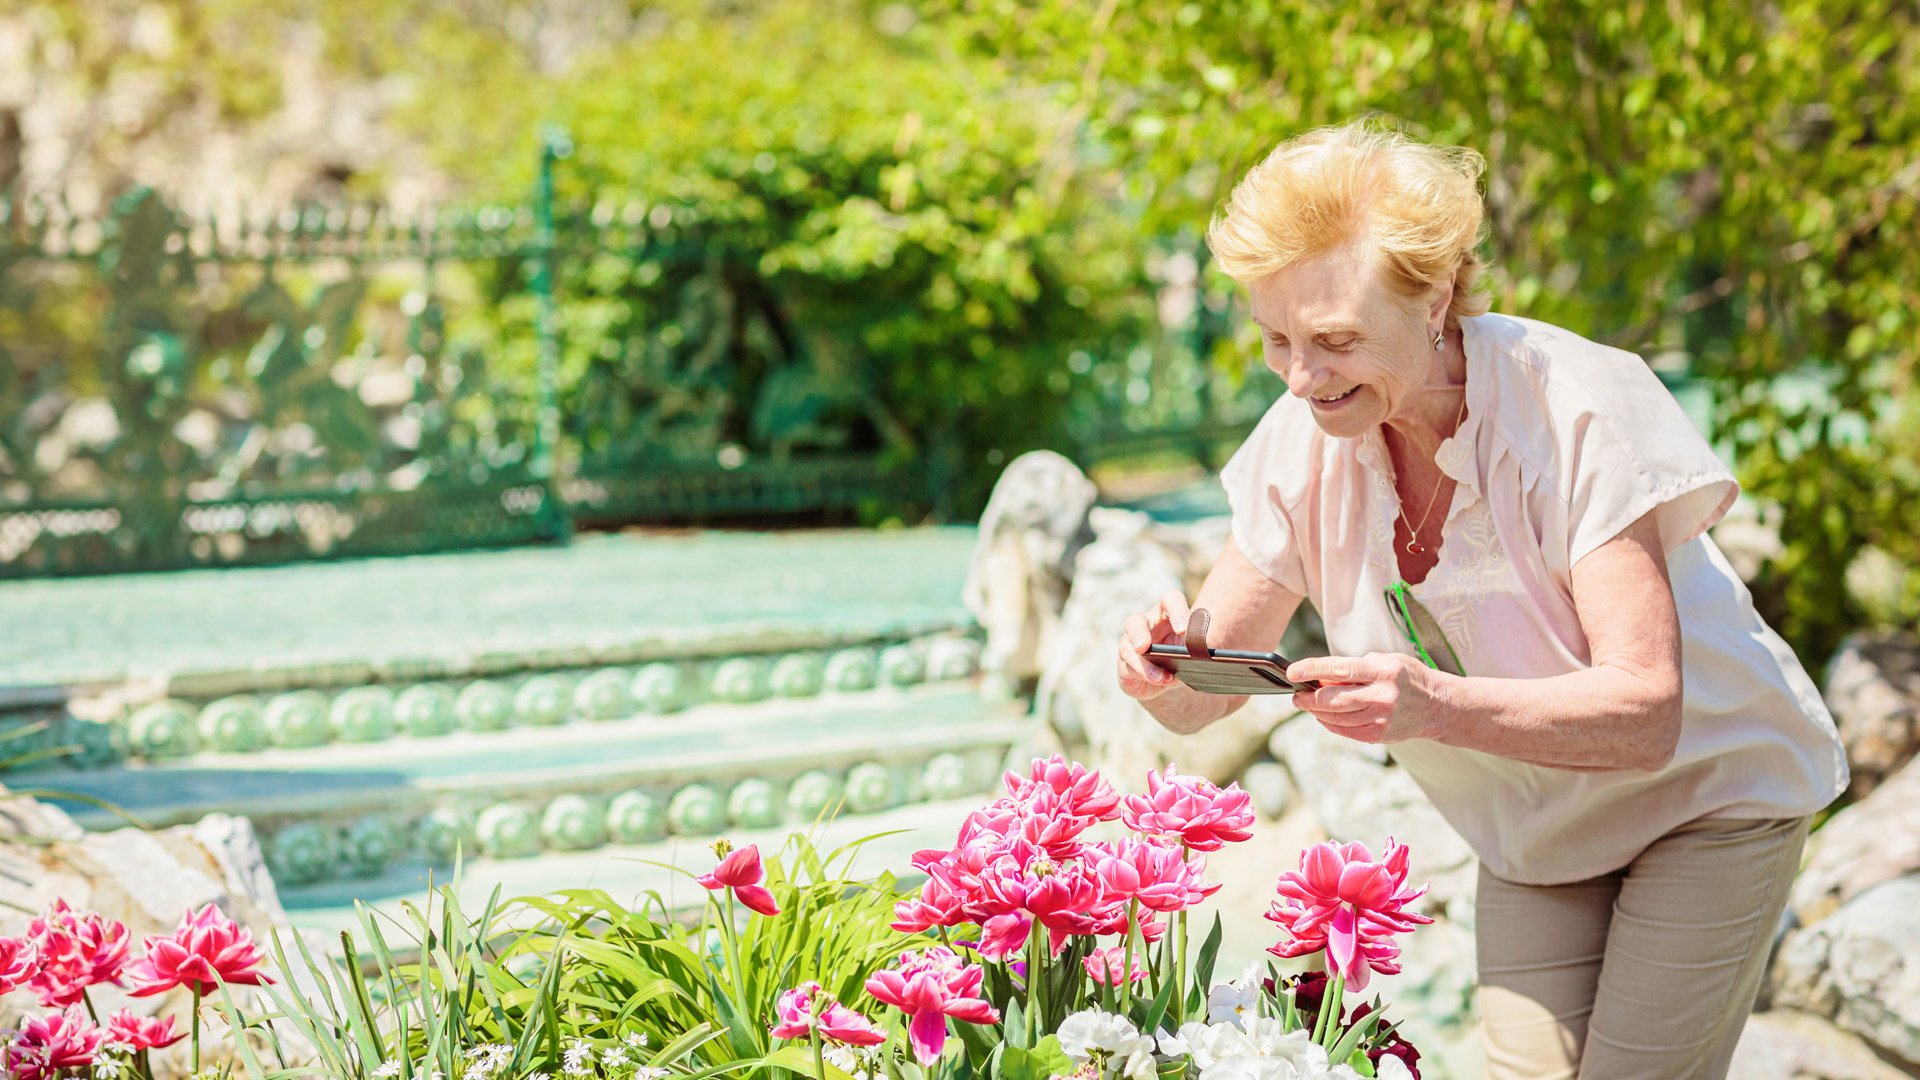 Senior woman sniffing flowers outdoors